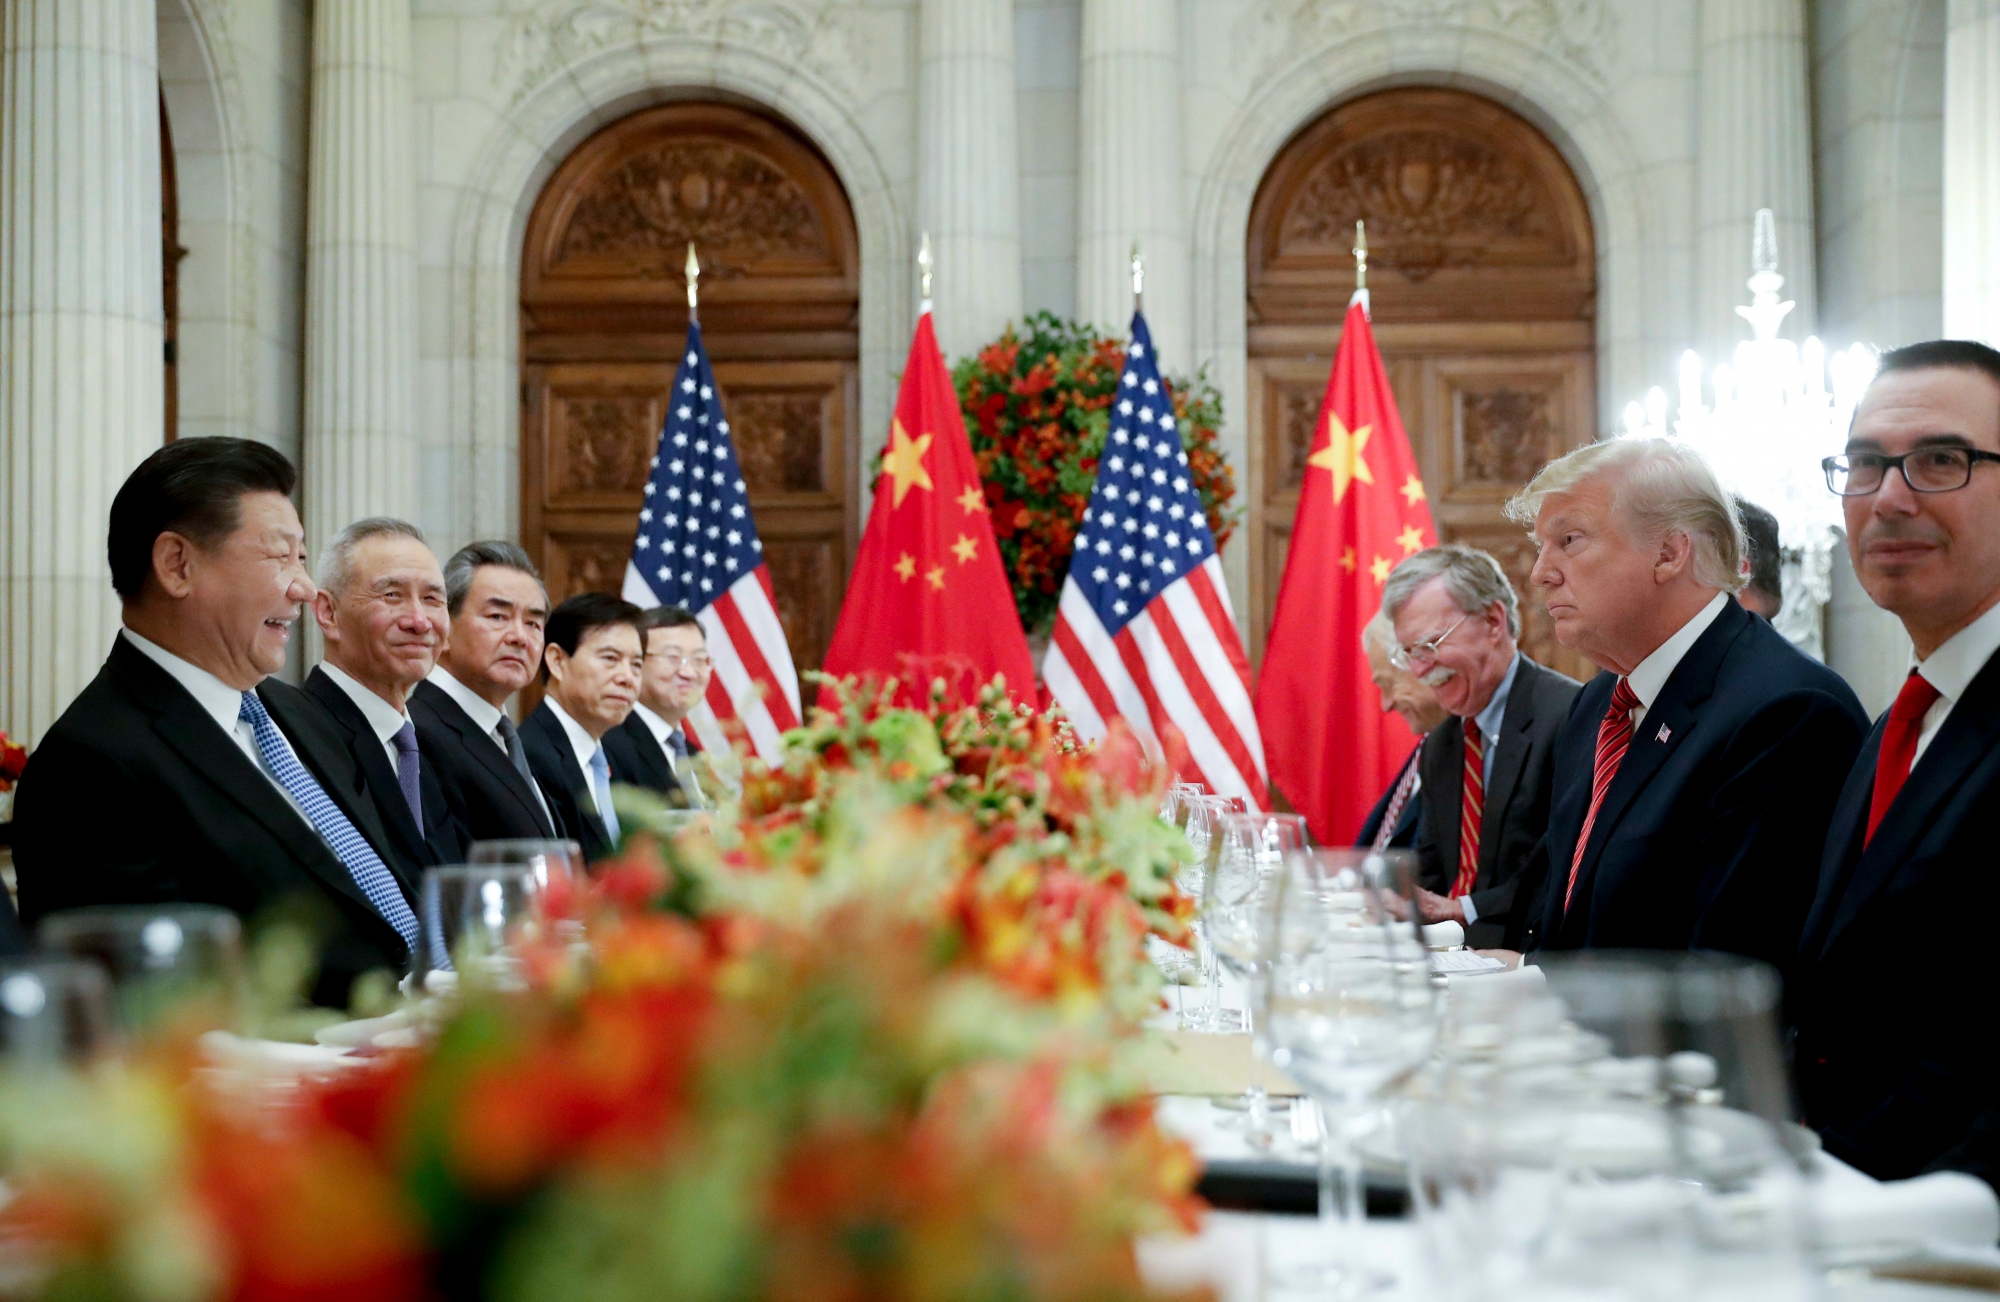 President Donald Trump with China's President Xi Jinping during their bilateral meeting at the G20 Summit, Saturday, Dec. 1, 2018 in Buenos Aires, Argentina. (AP Photo/Pablo Martinez Monsivais) Trump Argentina G20 Summit